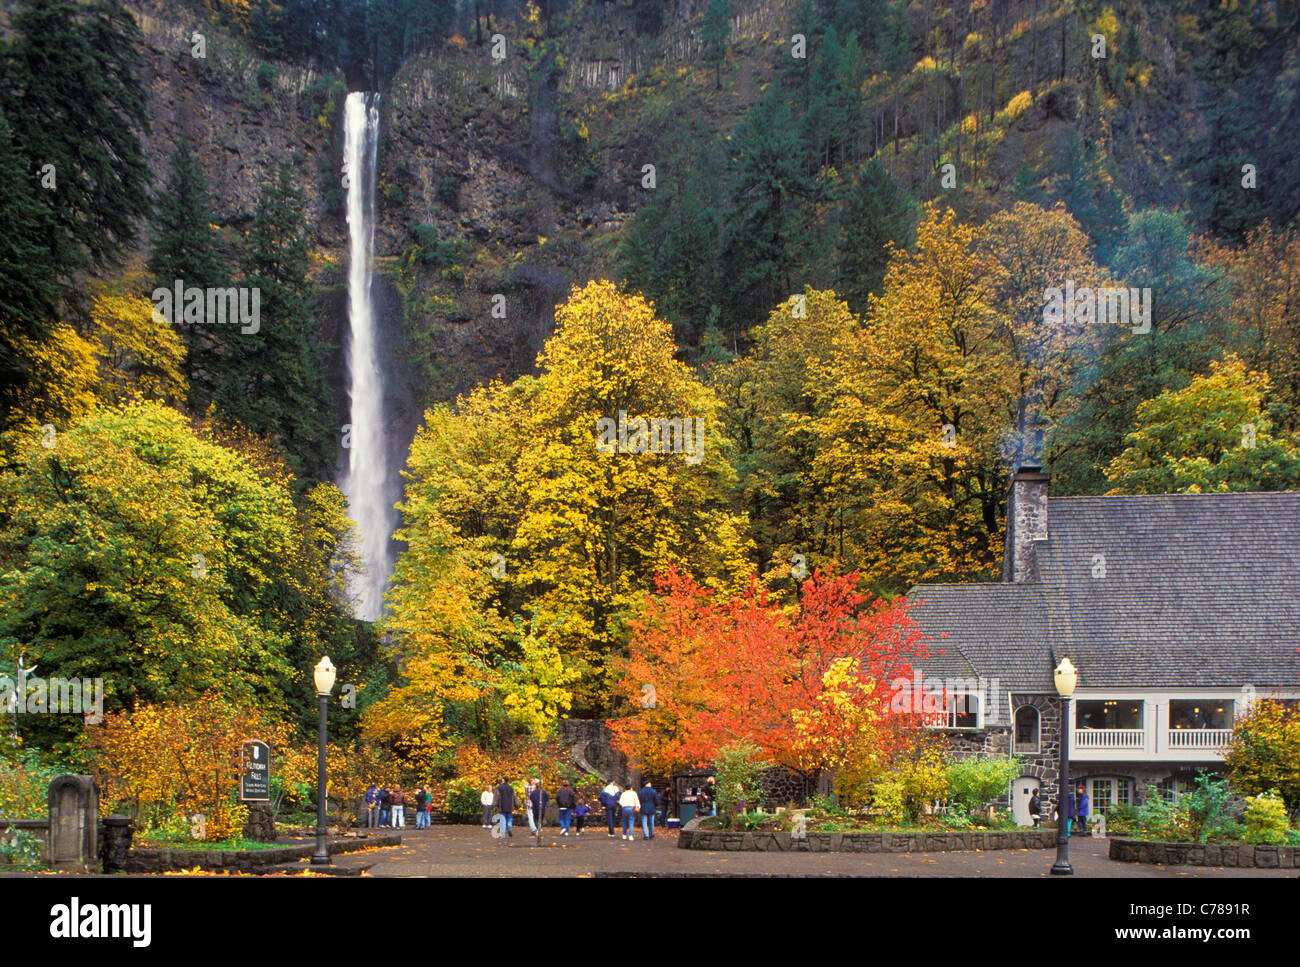 Multnomah Falls and Lodge with trees in Fall color; Columbia River Gorge National Scenic Area, Oregon. Stock Photo